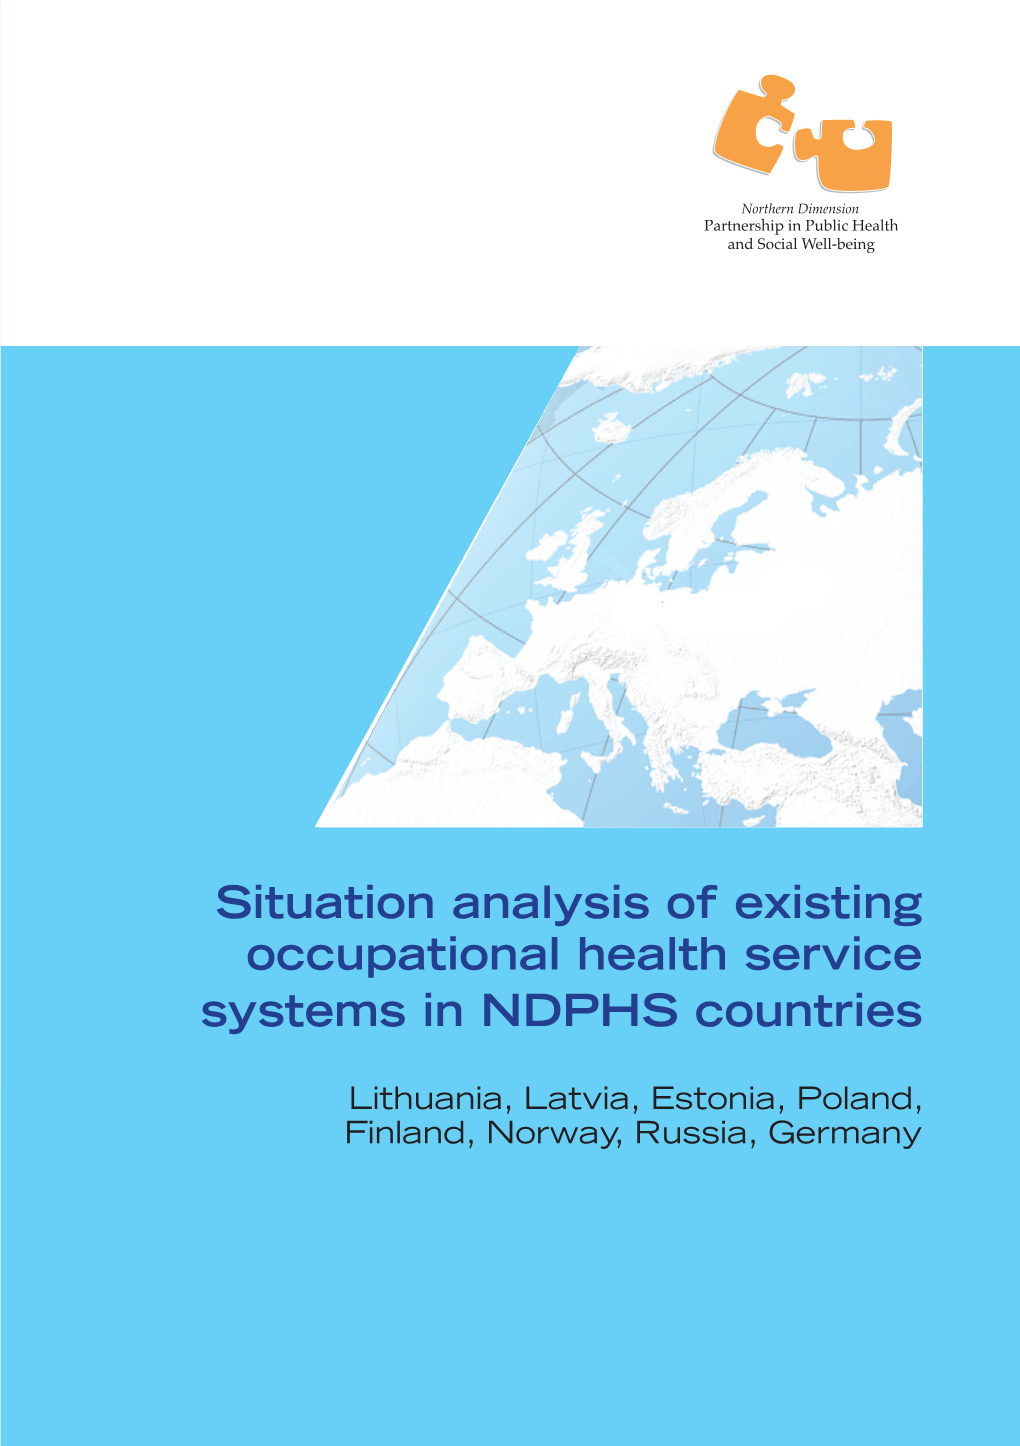 Occupational Health Service Systems in NDPHS Countries